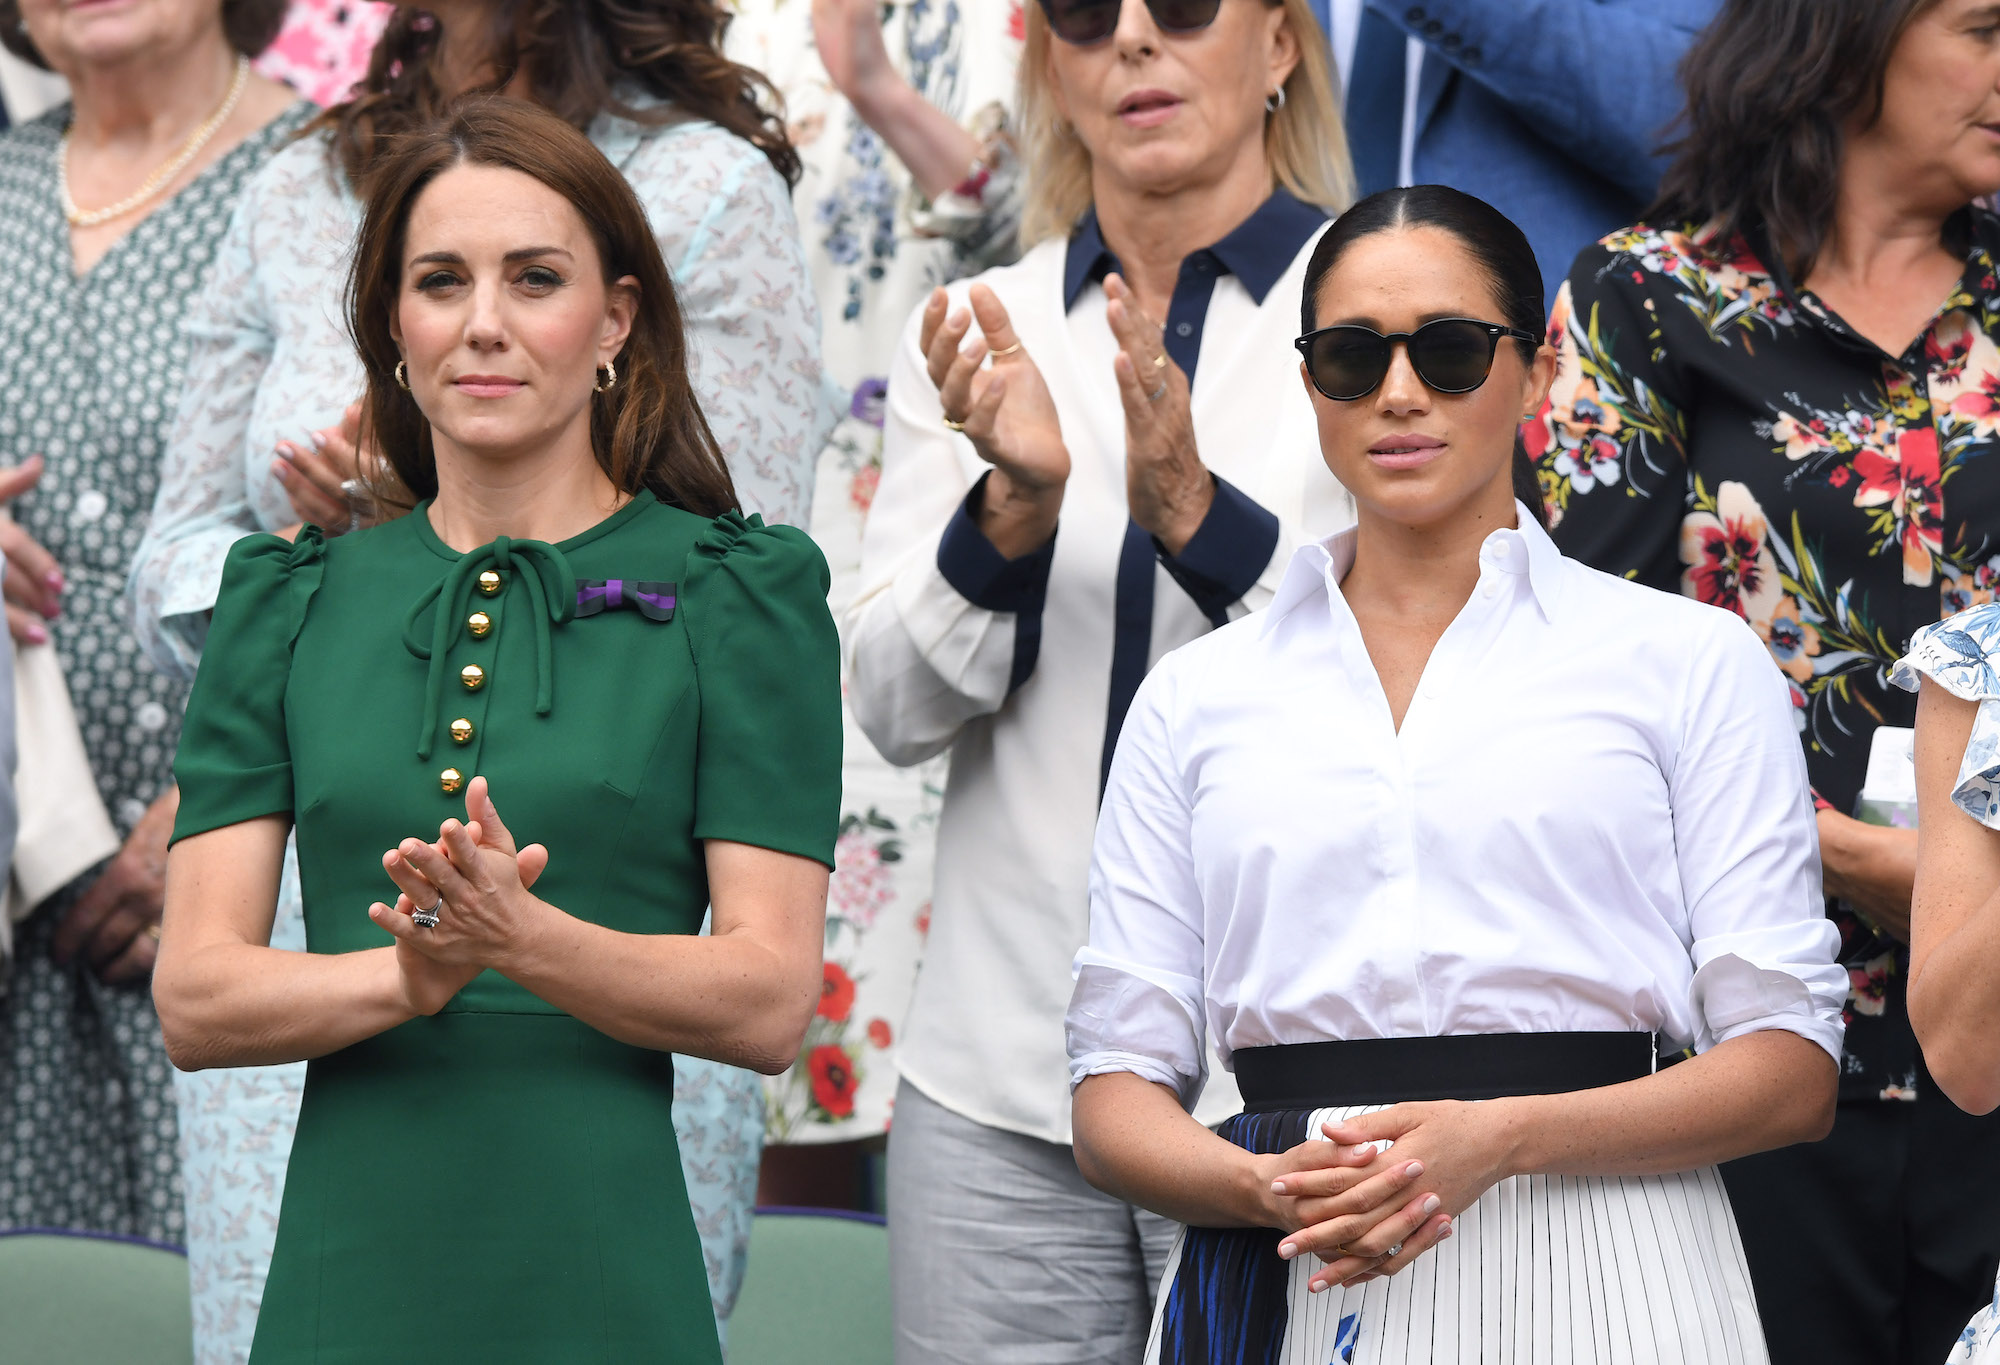 Kate Middleton and Meghan Markle standing next to each other, not smiling